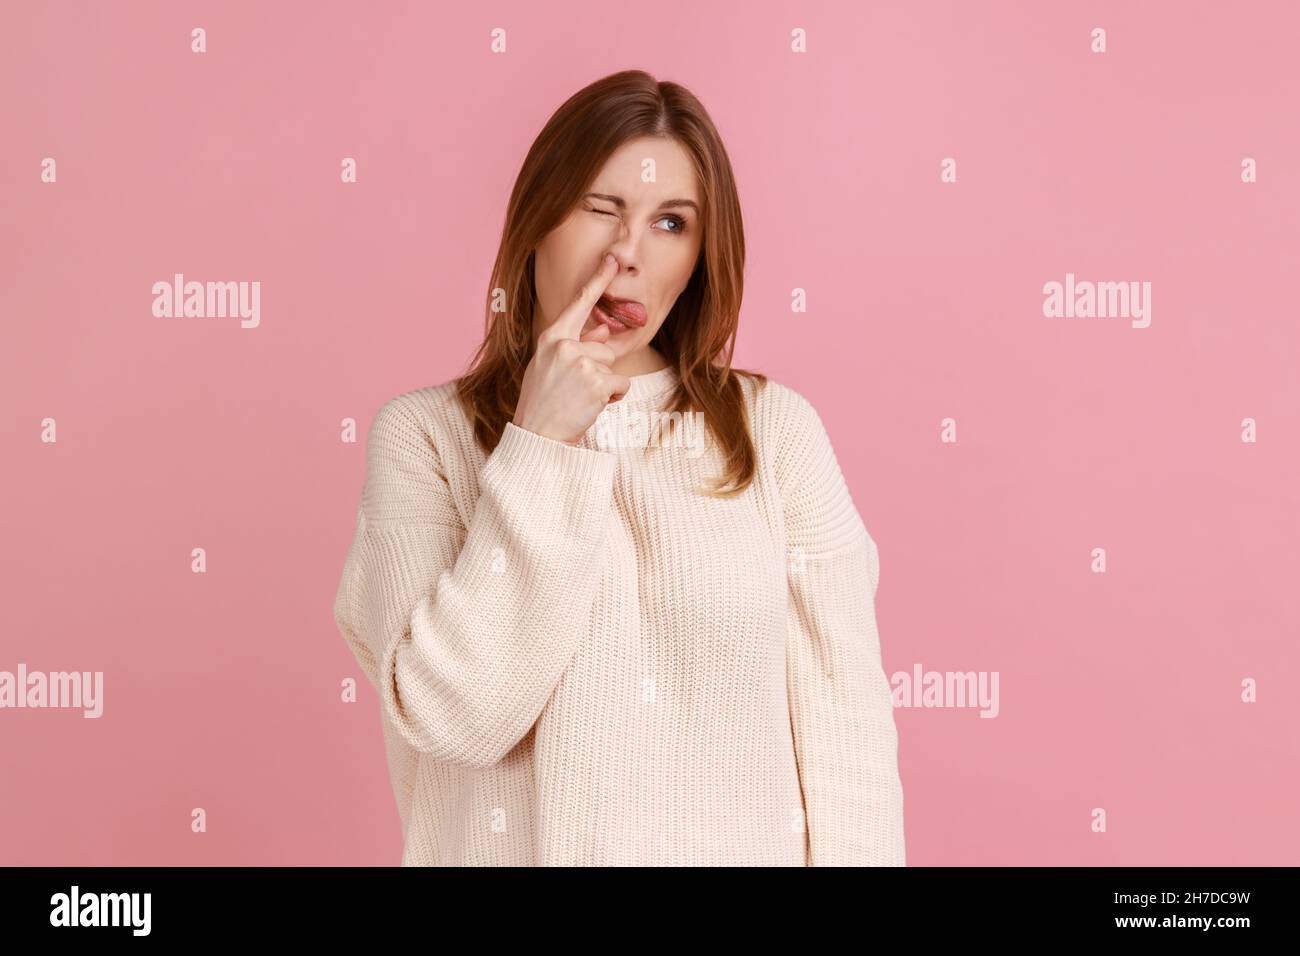 Portrait of blond woman sticking out tongue while picking nose, looking at camera with foolish silly expression, wearing white sweater. Indoor studio shot isolated on pink background. Stock Photo